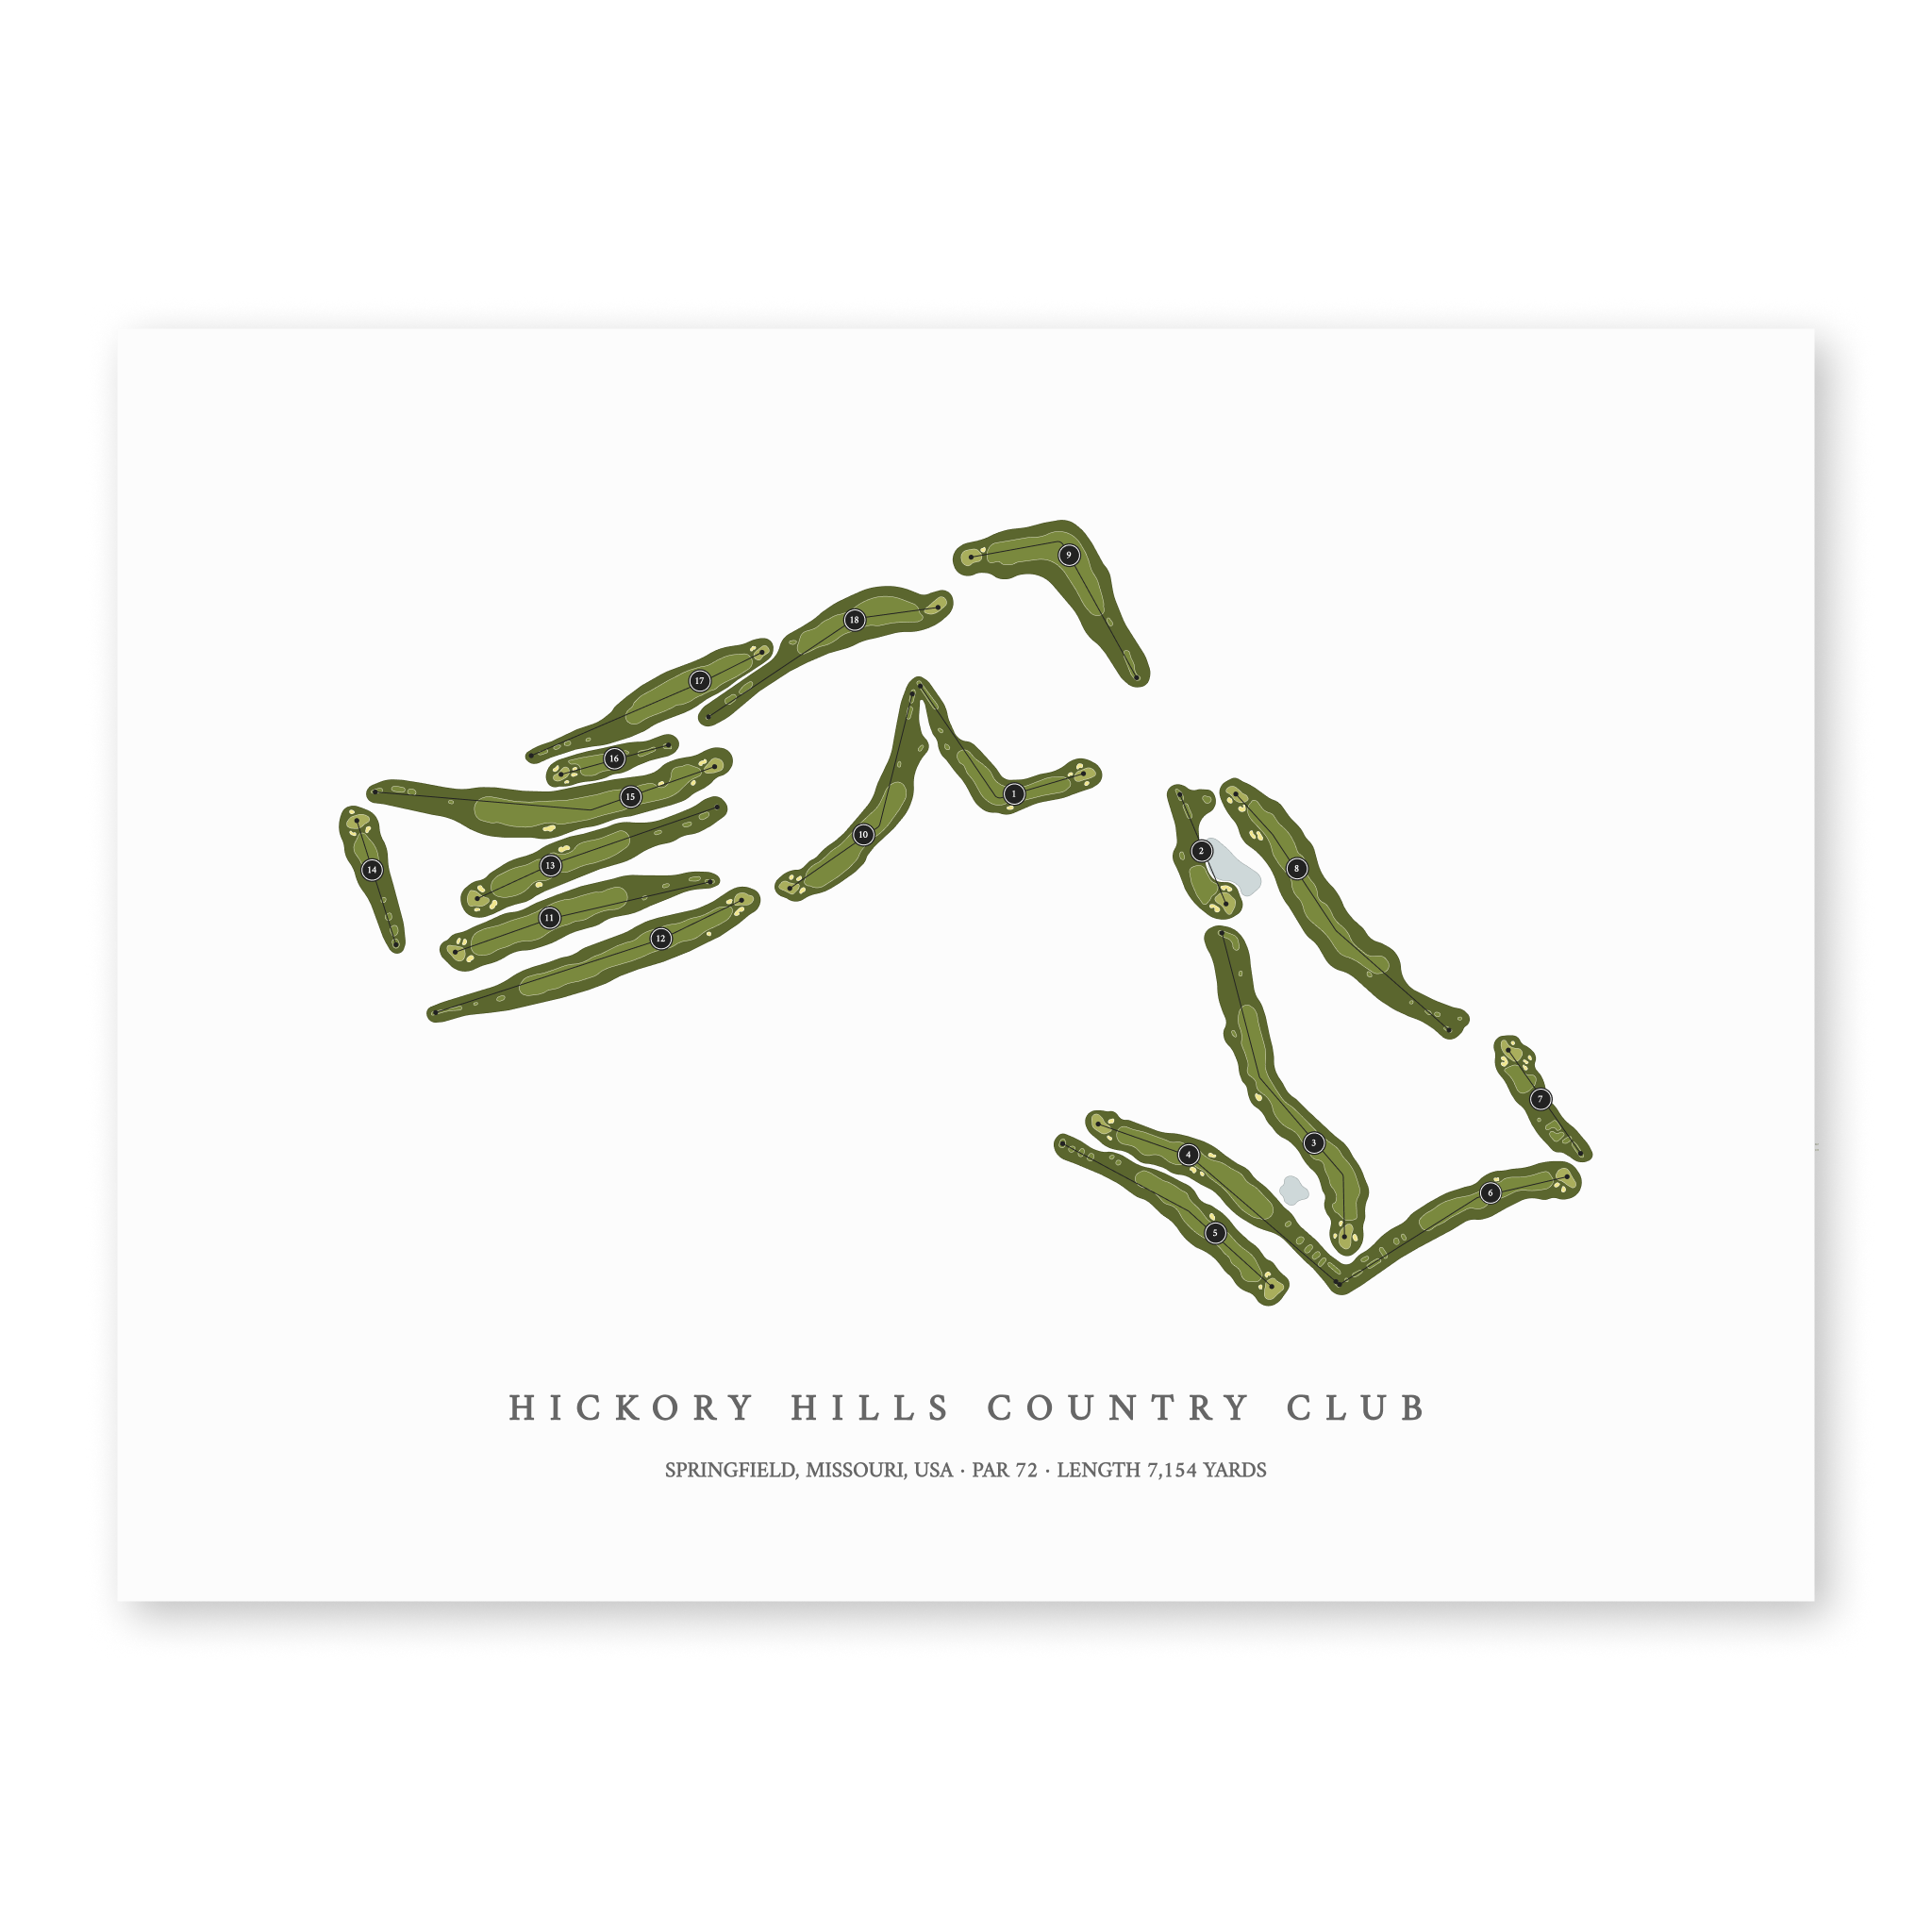 Hickory Hills Country Club| Golf Course Print | Unframed With Hole Numbers #hole numbers_yes